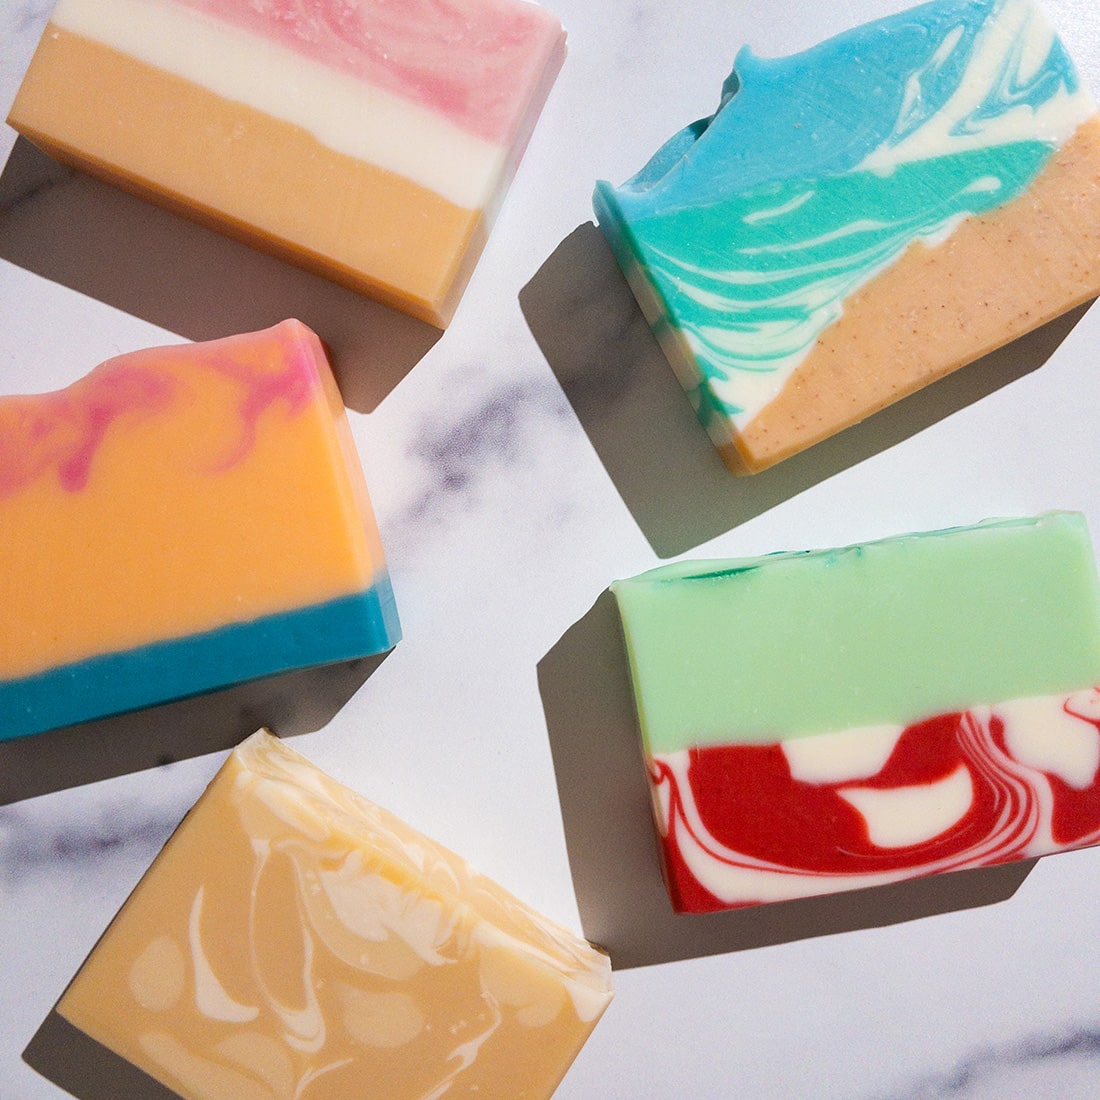 August Handmade Soaps - Set of 5 Soaps - Arcana Soaps Co.